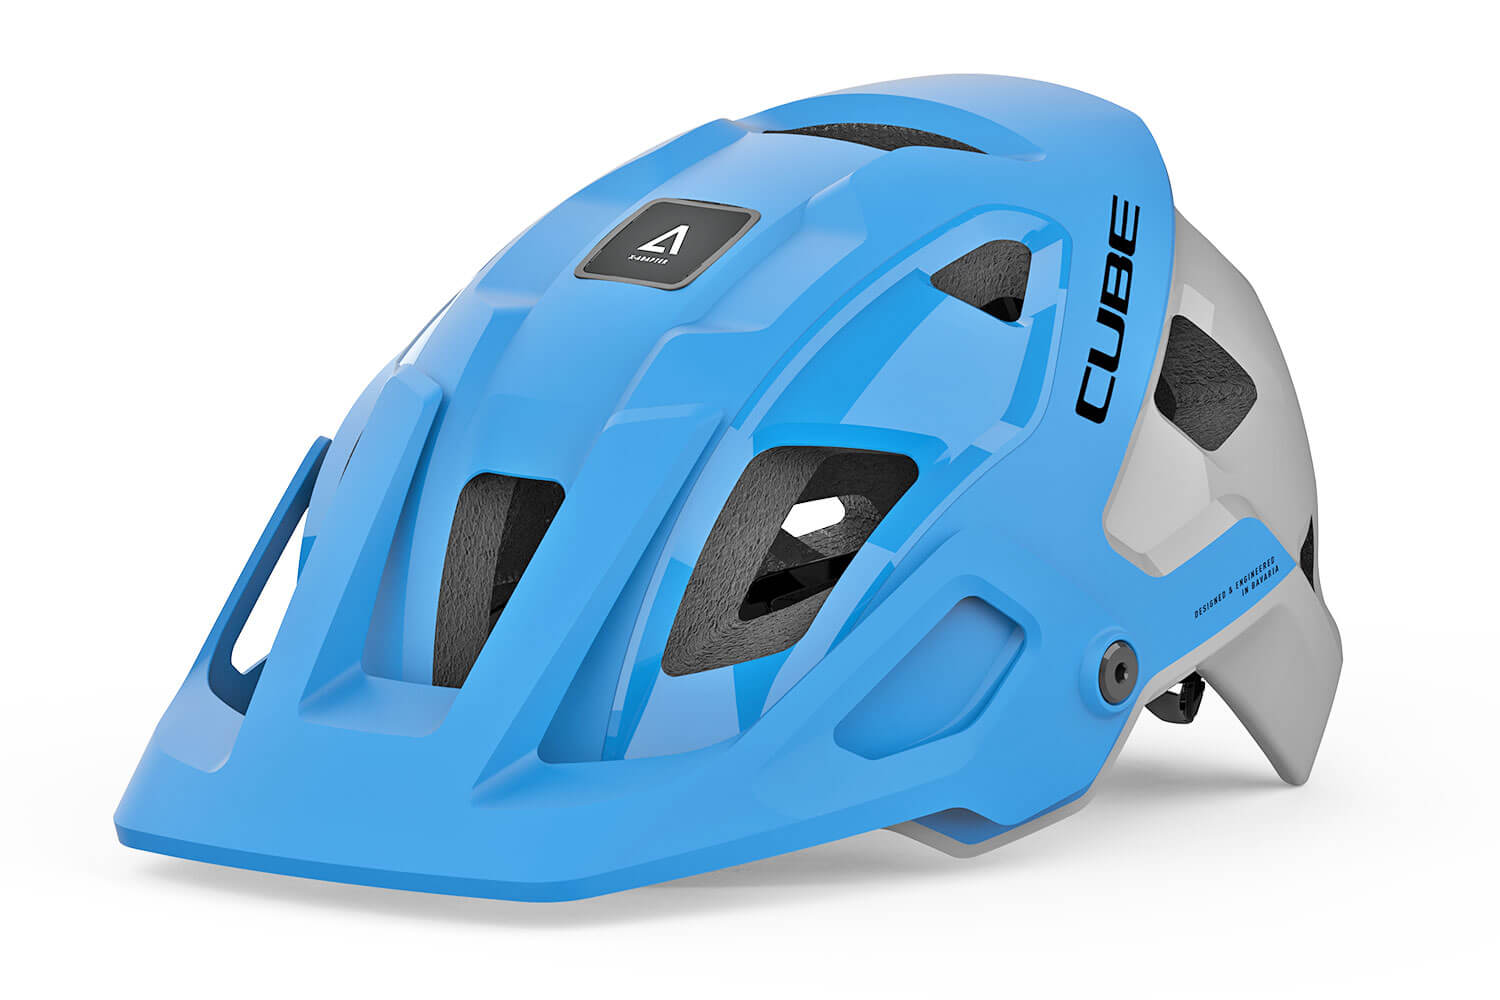 Cube Strover Mountainbike-Helm  